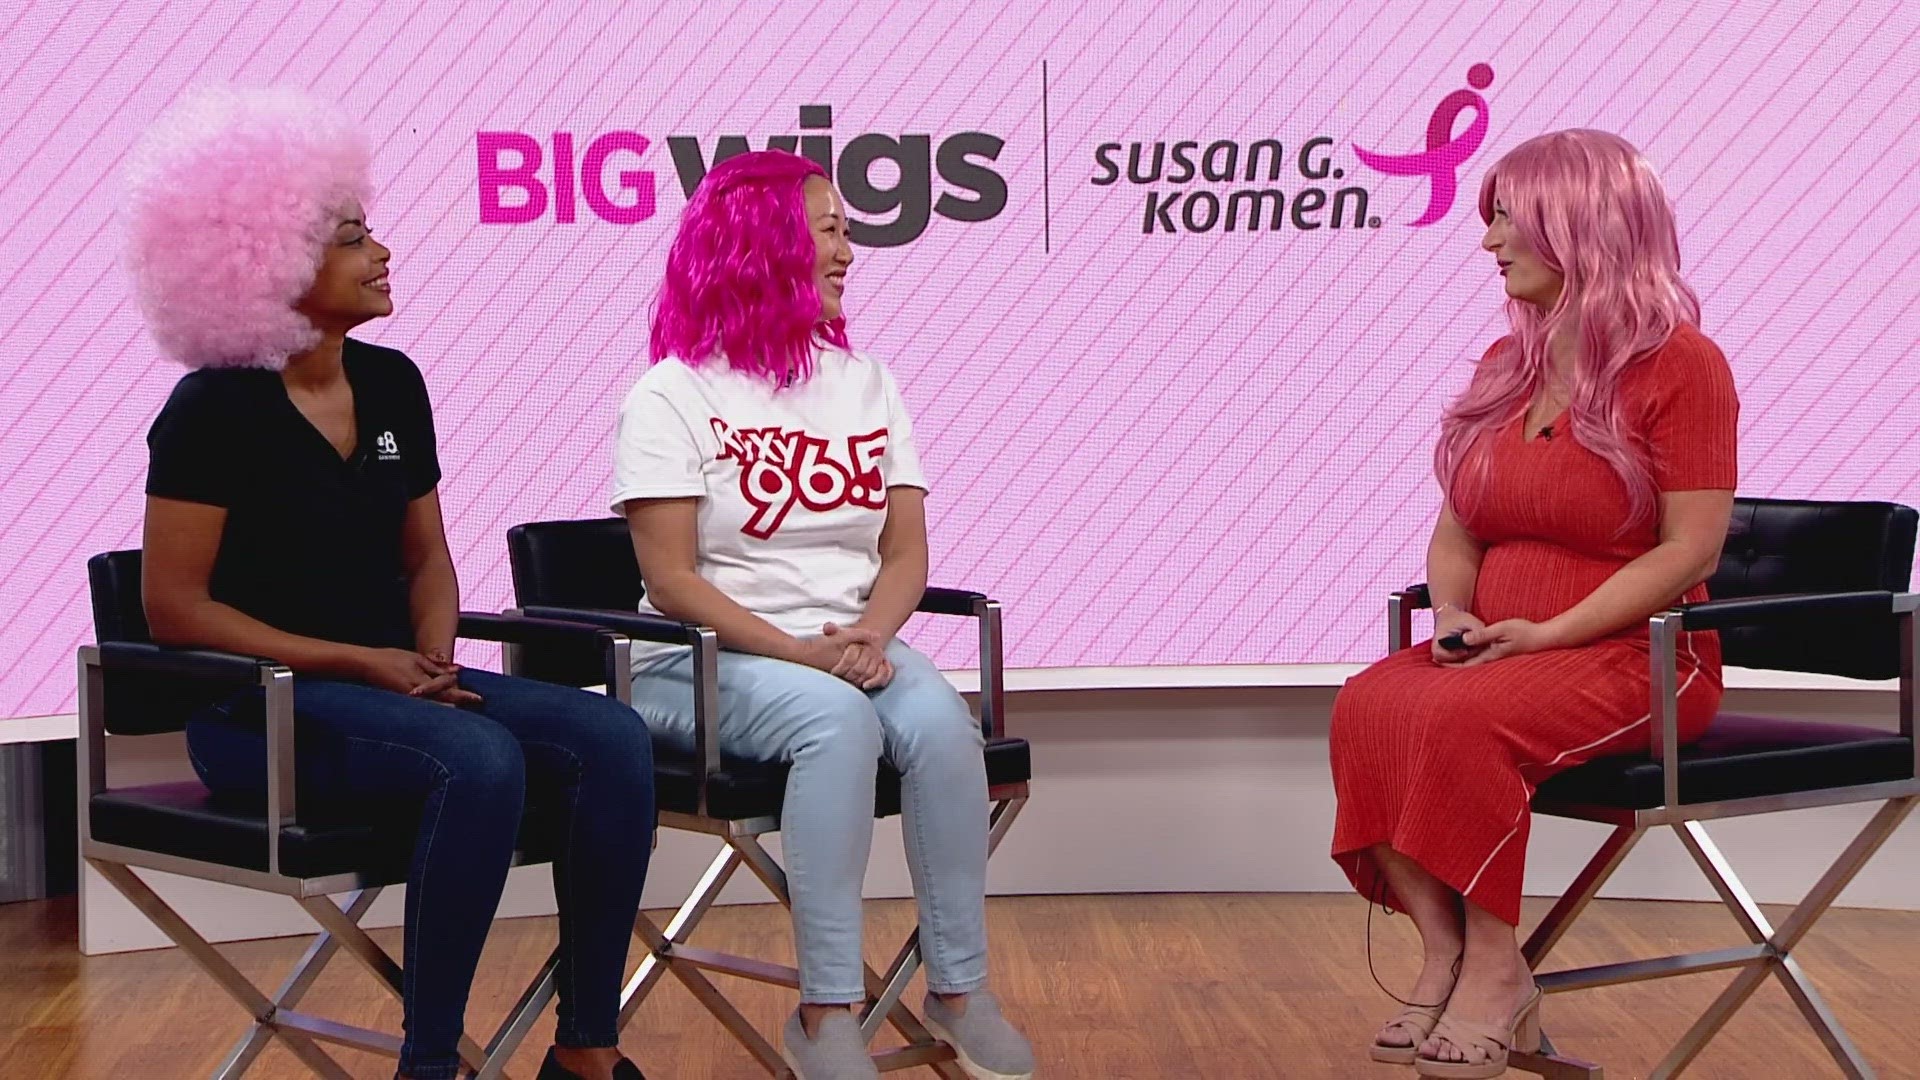 The “Big Wig” campaign is a friendly competition between passionate community members to see who can raise the most money to help fight breast cancer.